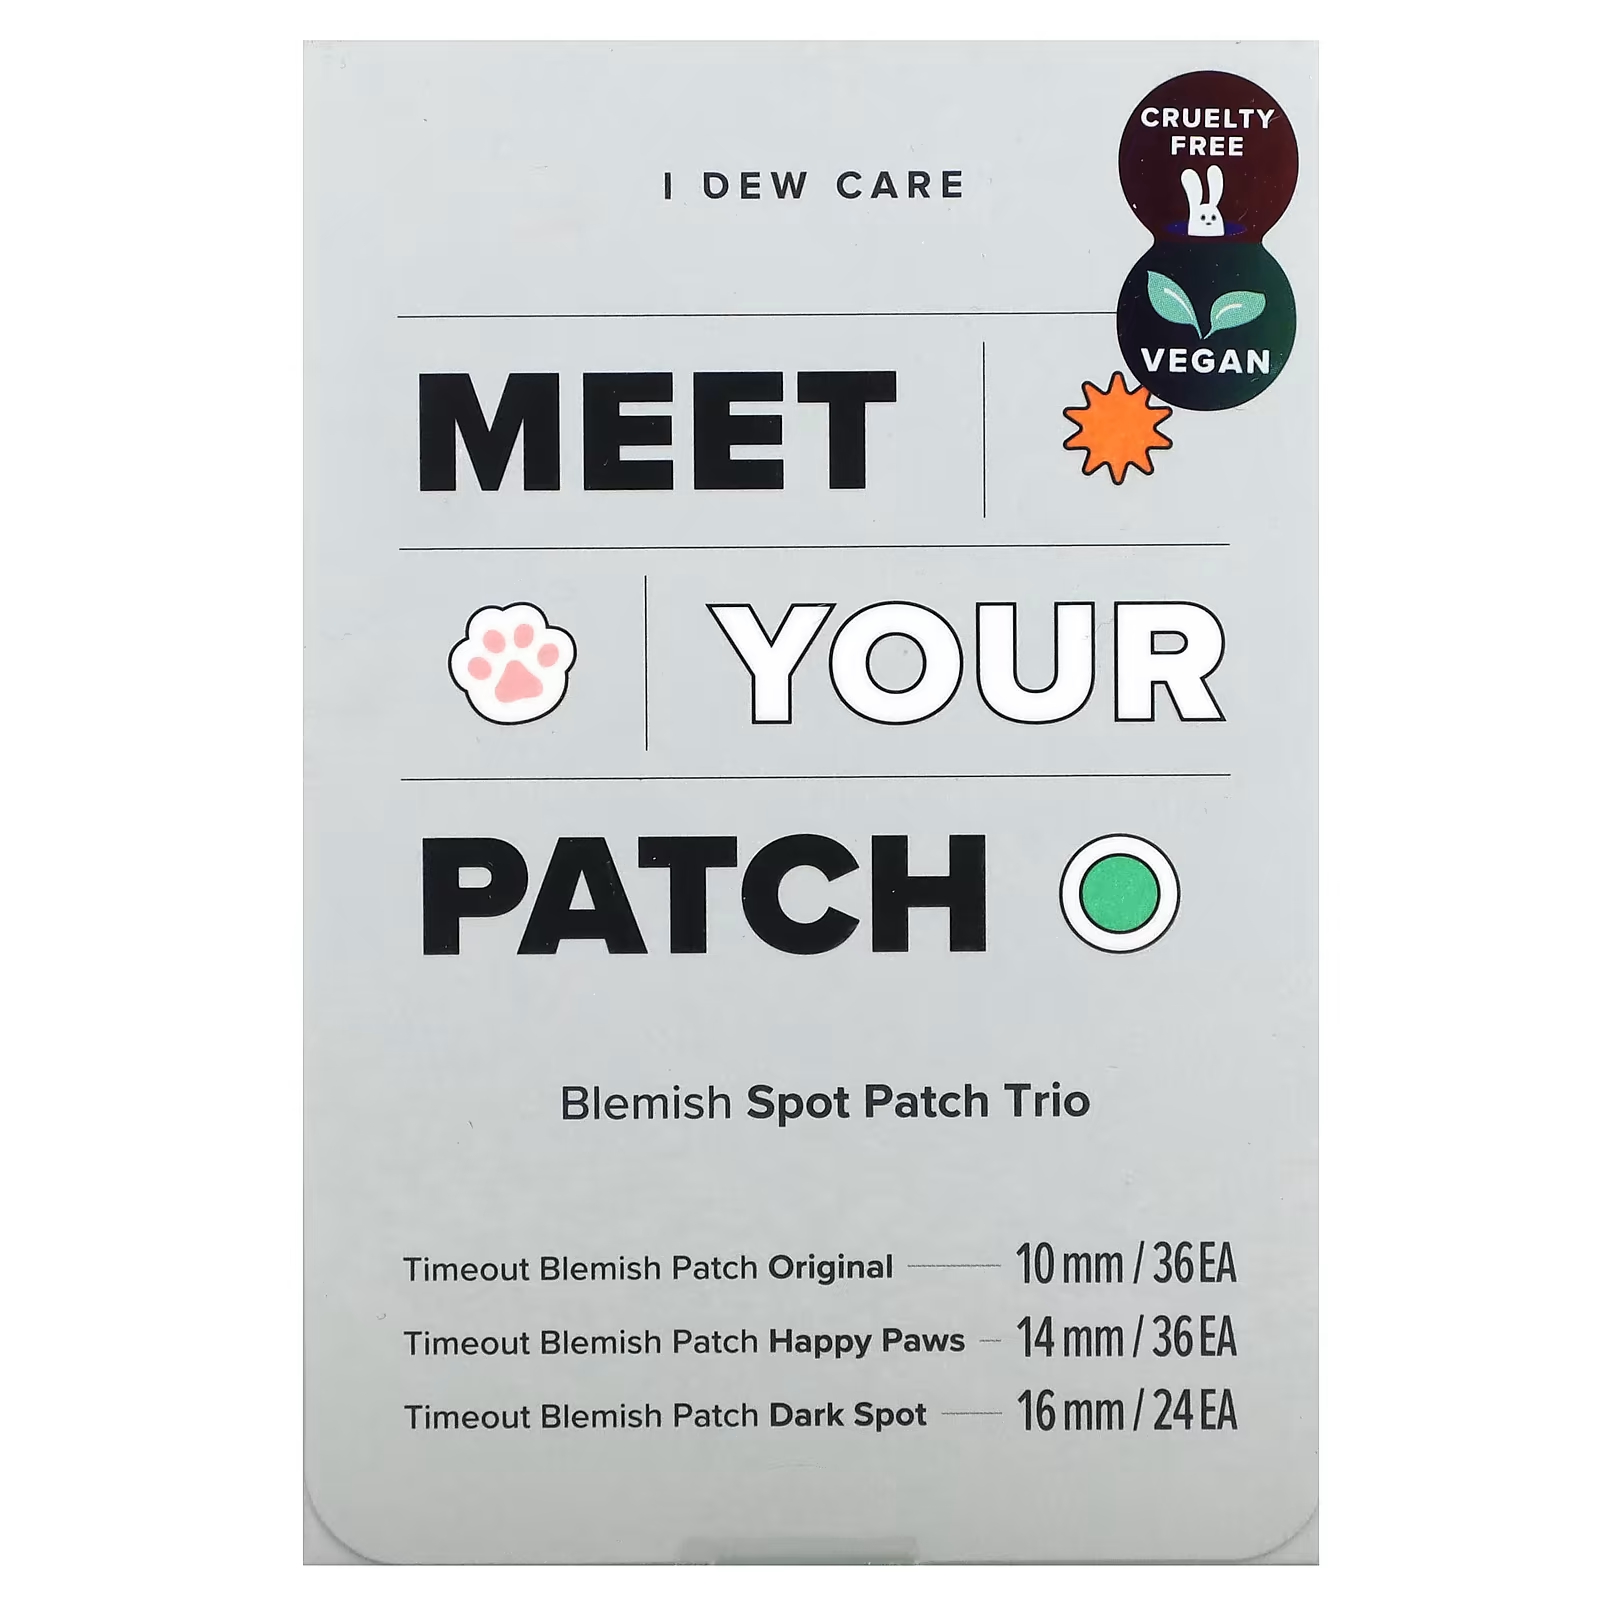 I Dew Care Meet Your Patch Blemish Spot Patch Trio 96 патчей free shipping 2n7002k 2n7002 7k patch transistor 2n7002k t1 new original spot transistores electronics